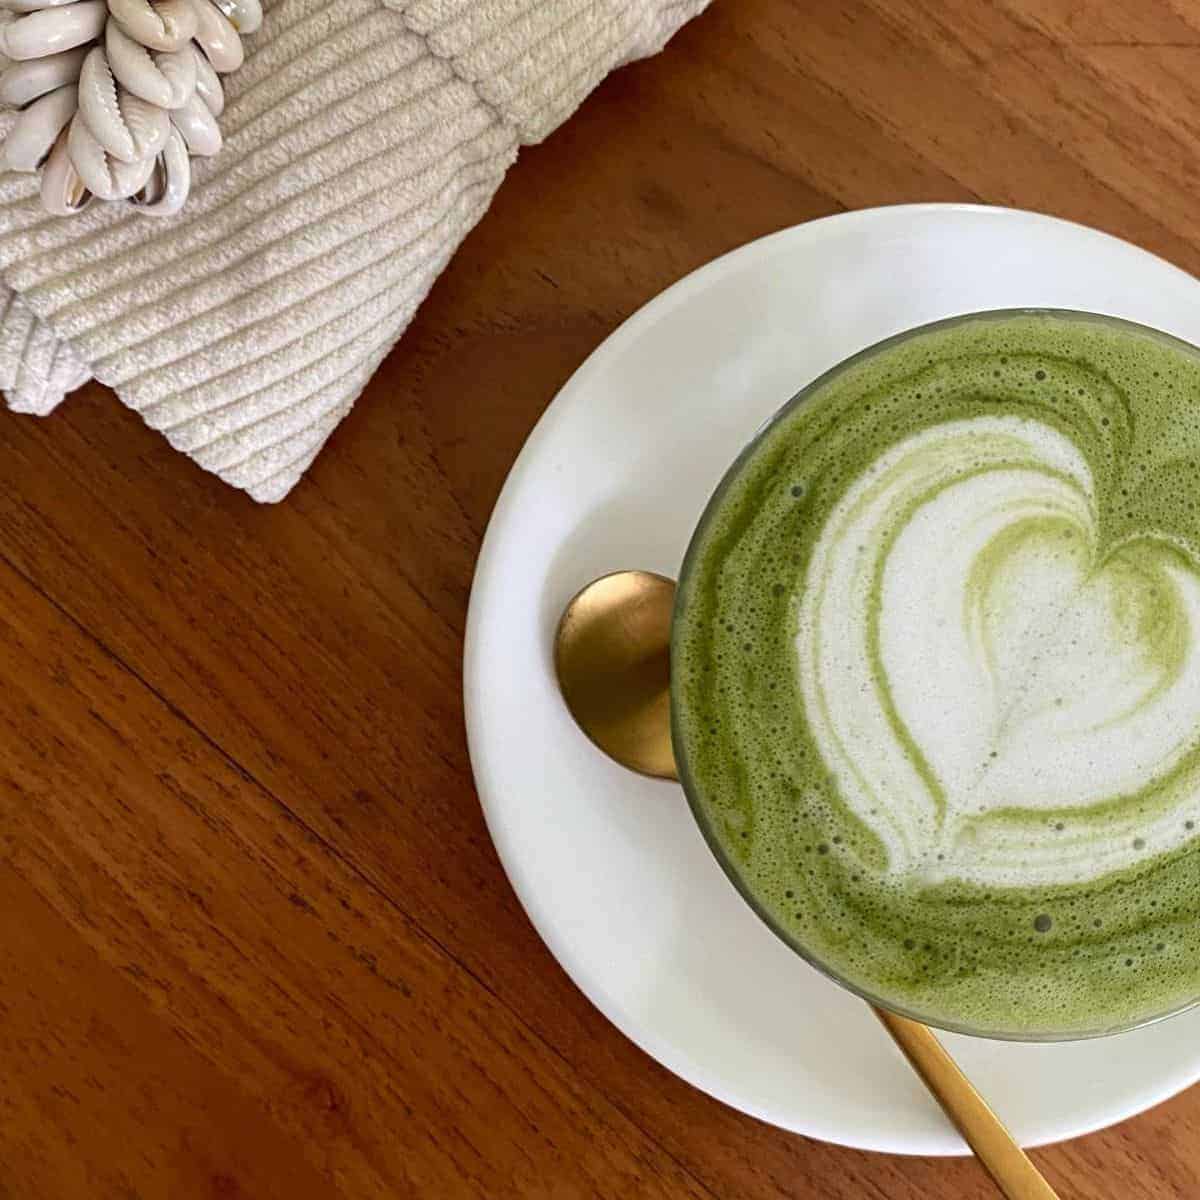 Top view of your favourite Matcha Latte cup with a golden spoon